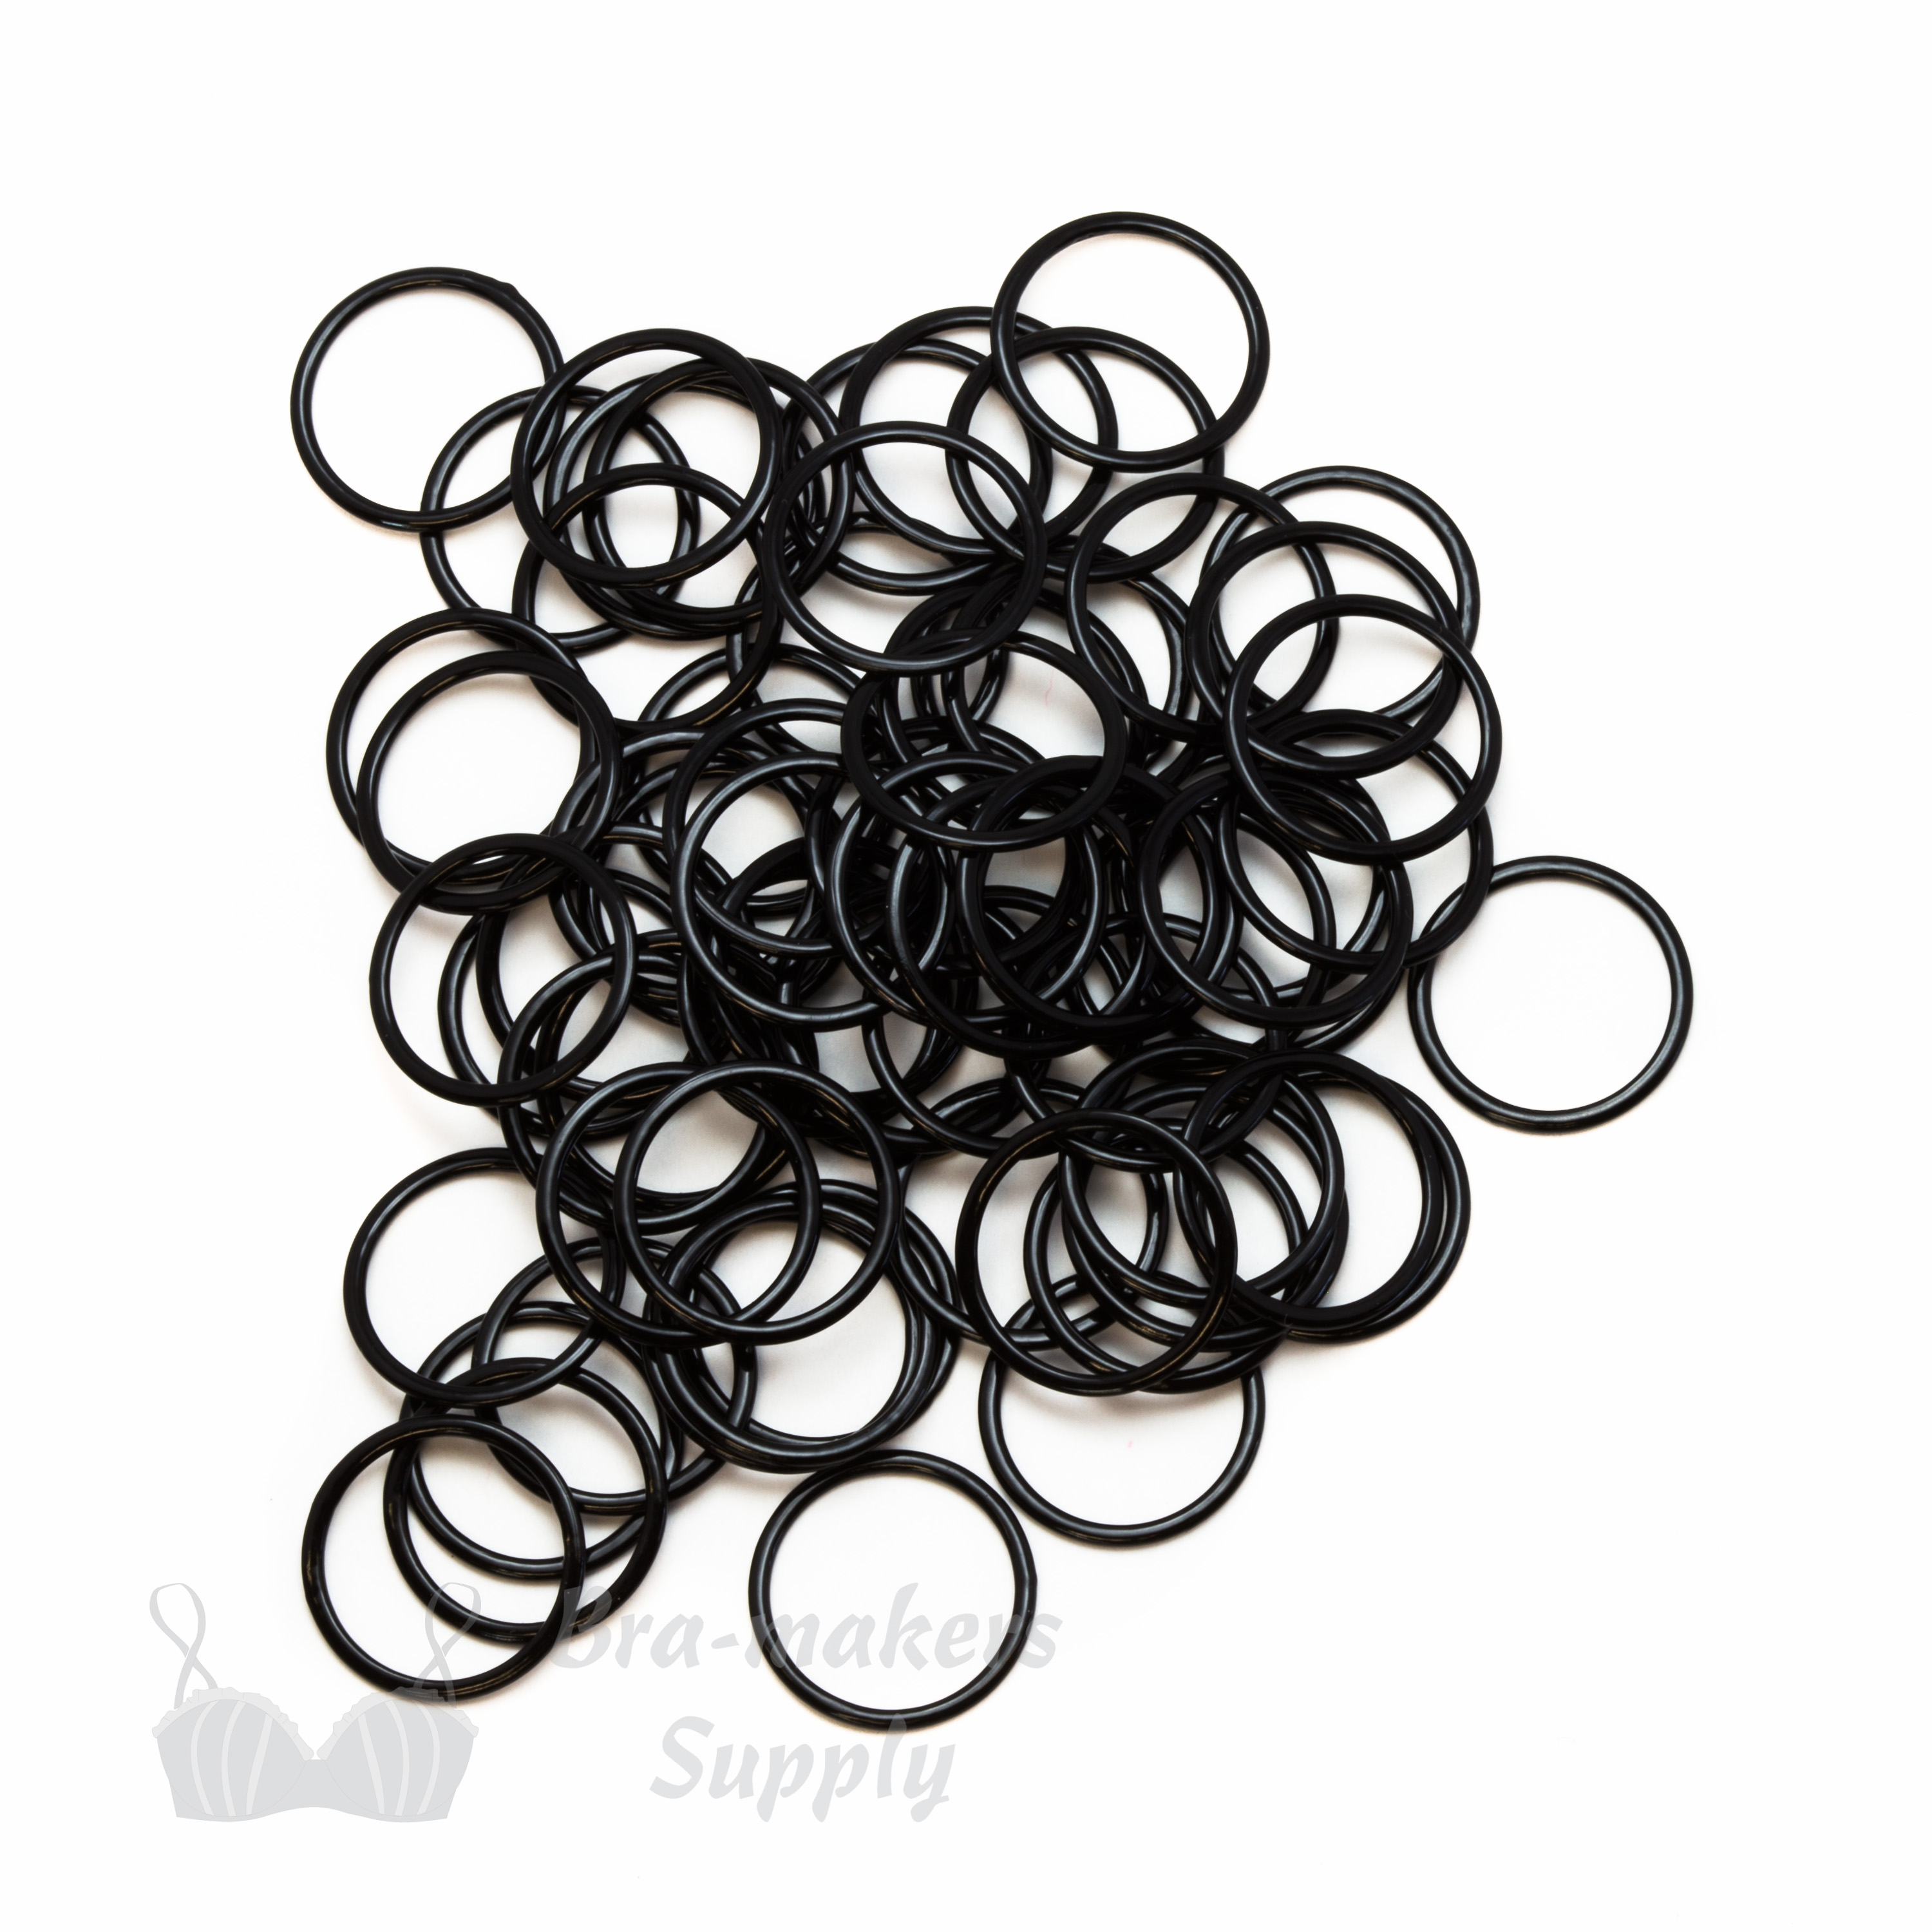 three quarters inch 19mm RM-600 R black nylon coated metal rings sliders or anthracite Pantone 19-4007 from Bra-Makers Supply 100 rings shown